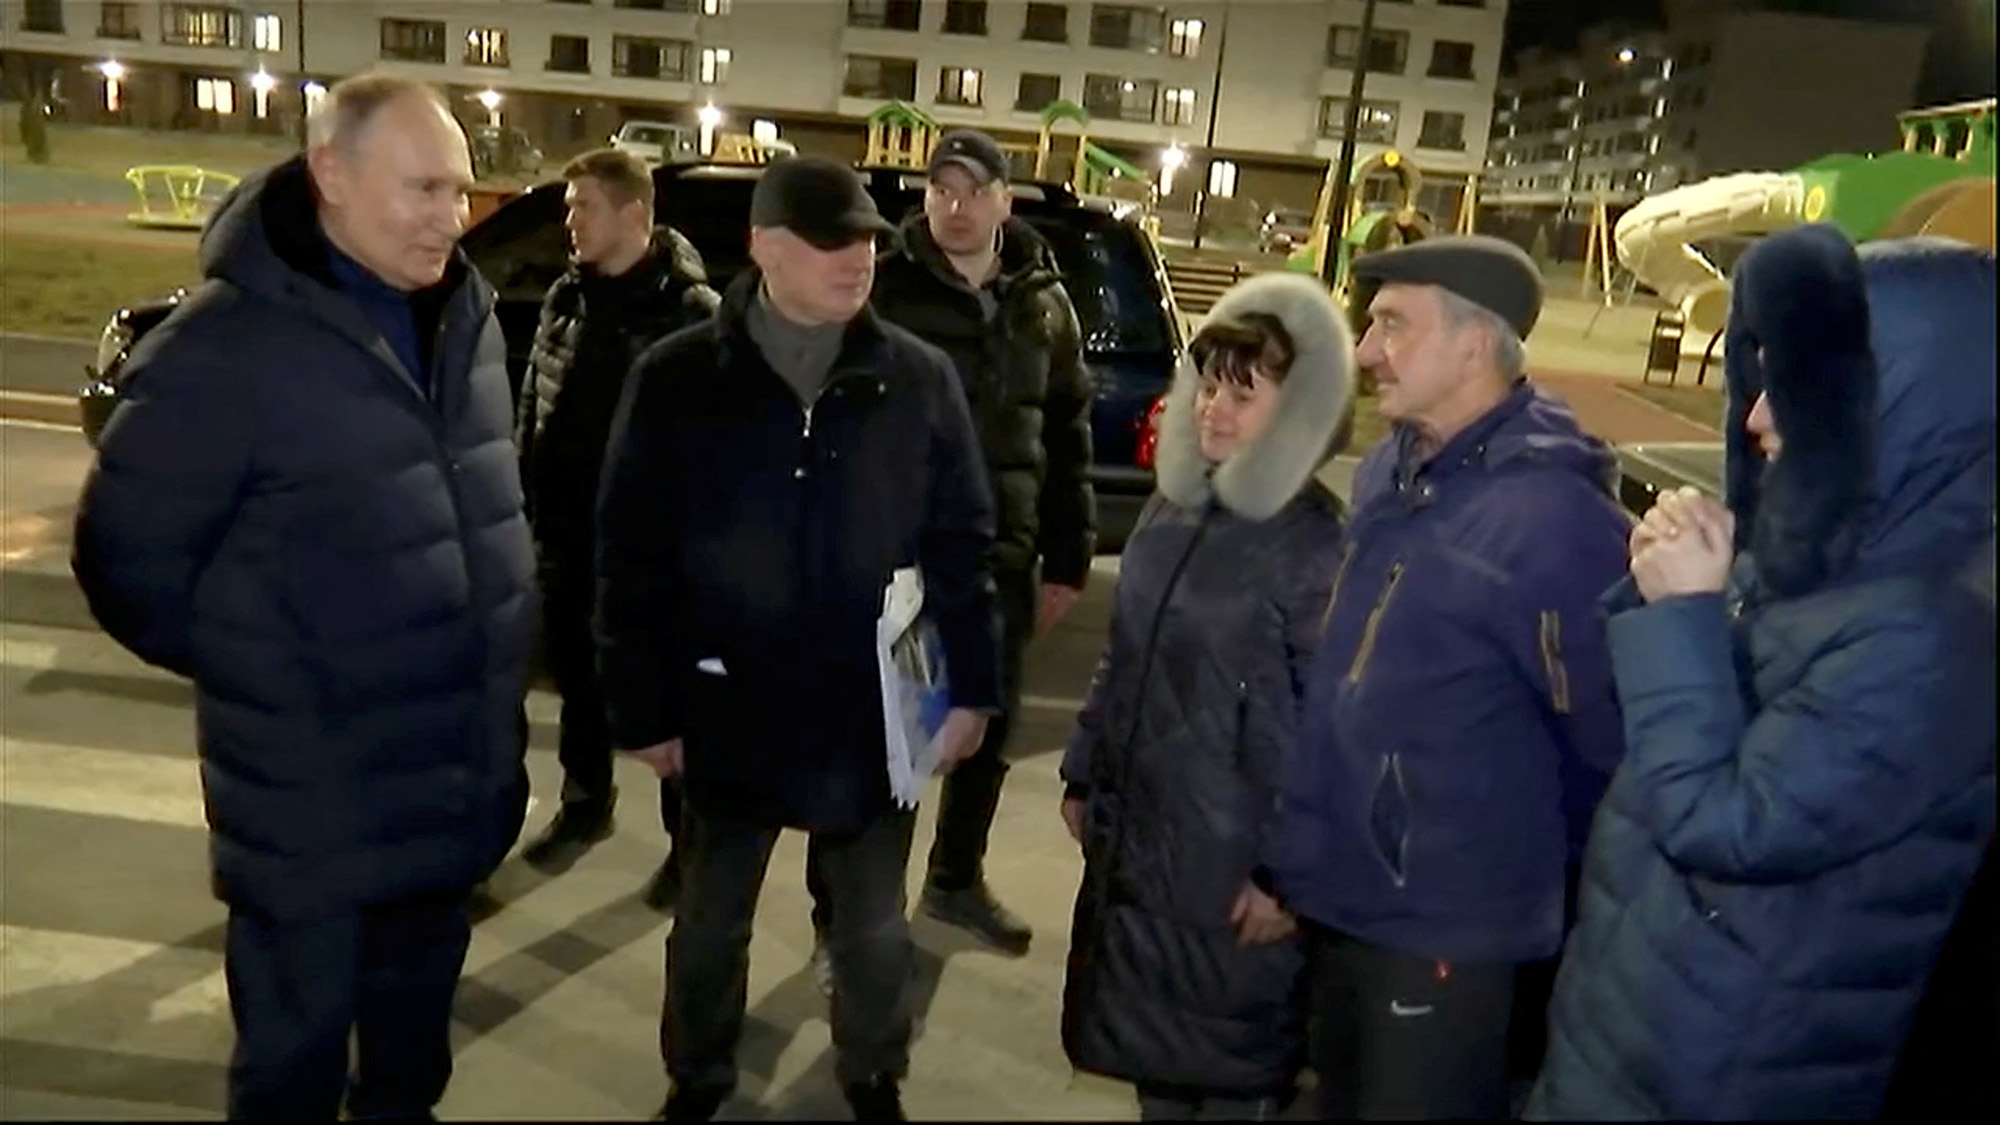 Russian President Vladimir Putin, left, listens to local residents as he visits Mariupol in Russian-controlled Ukraine, in this still image taken from handout video released on March 19.